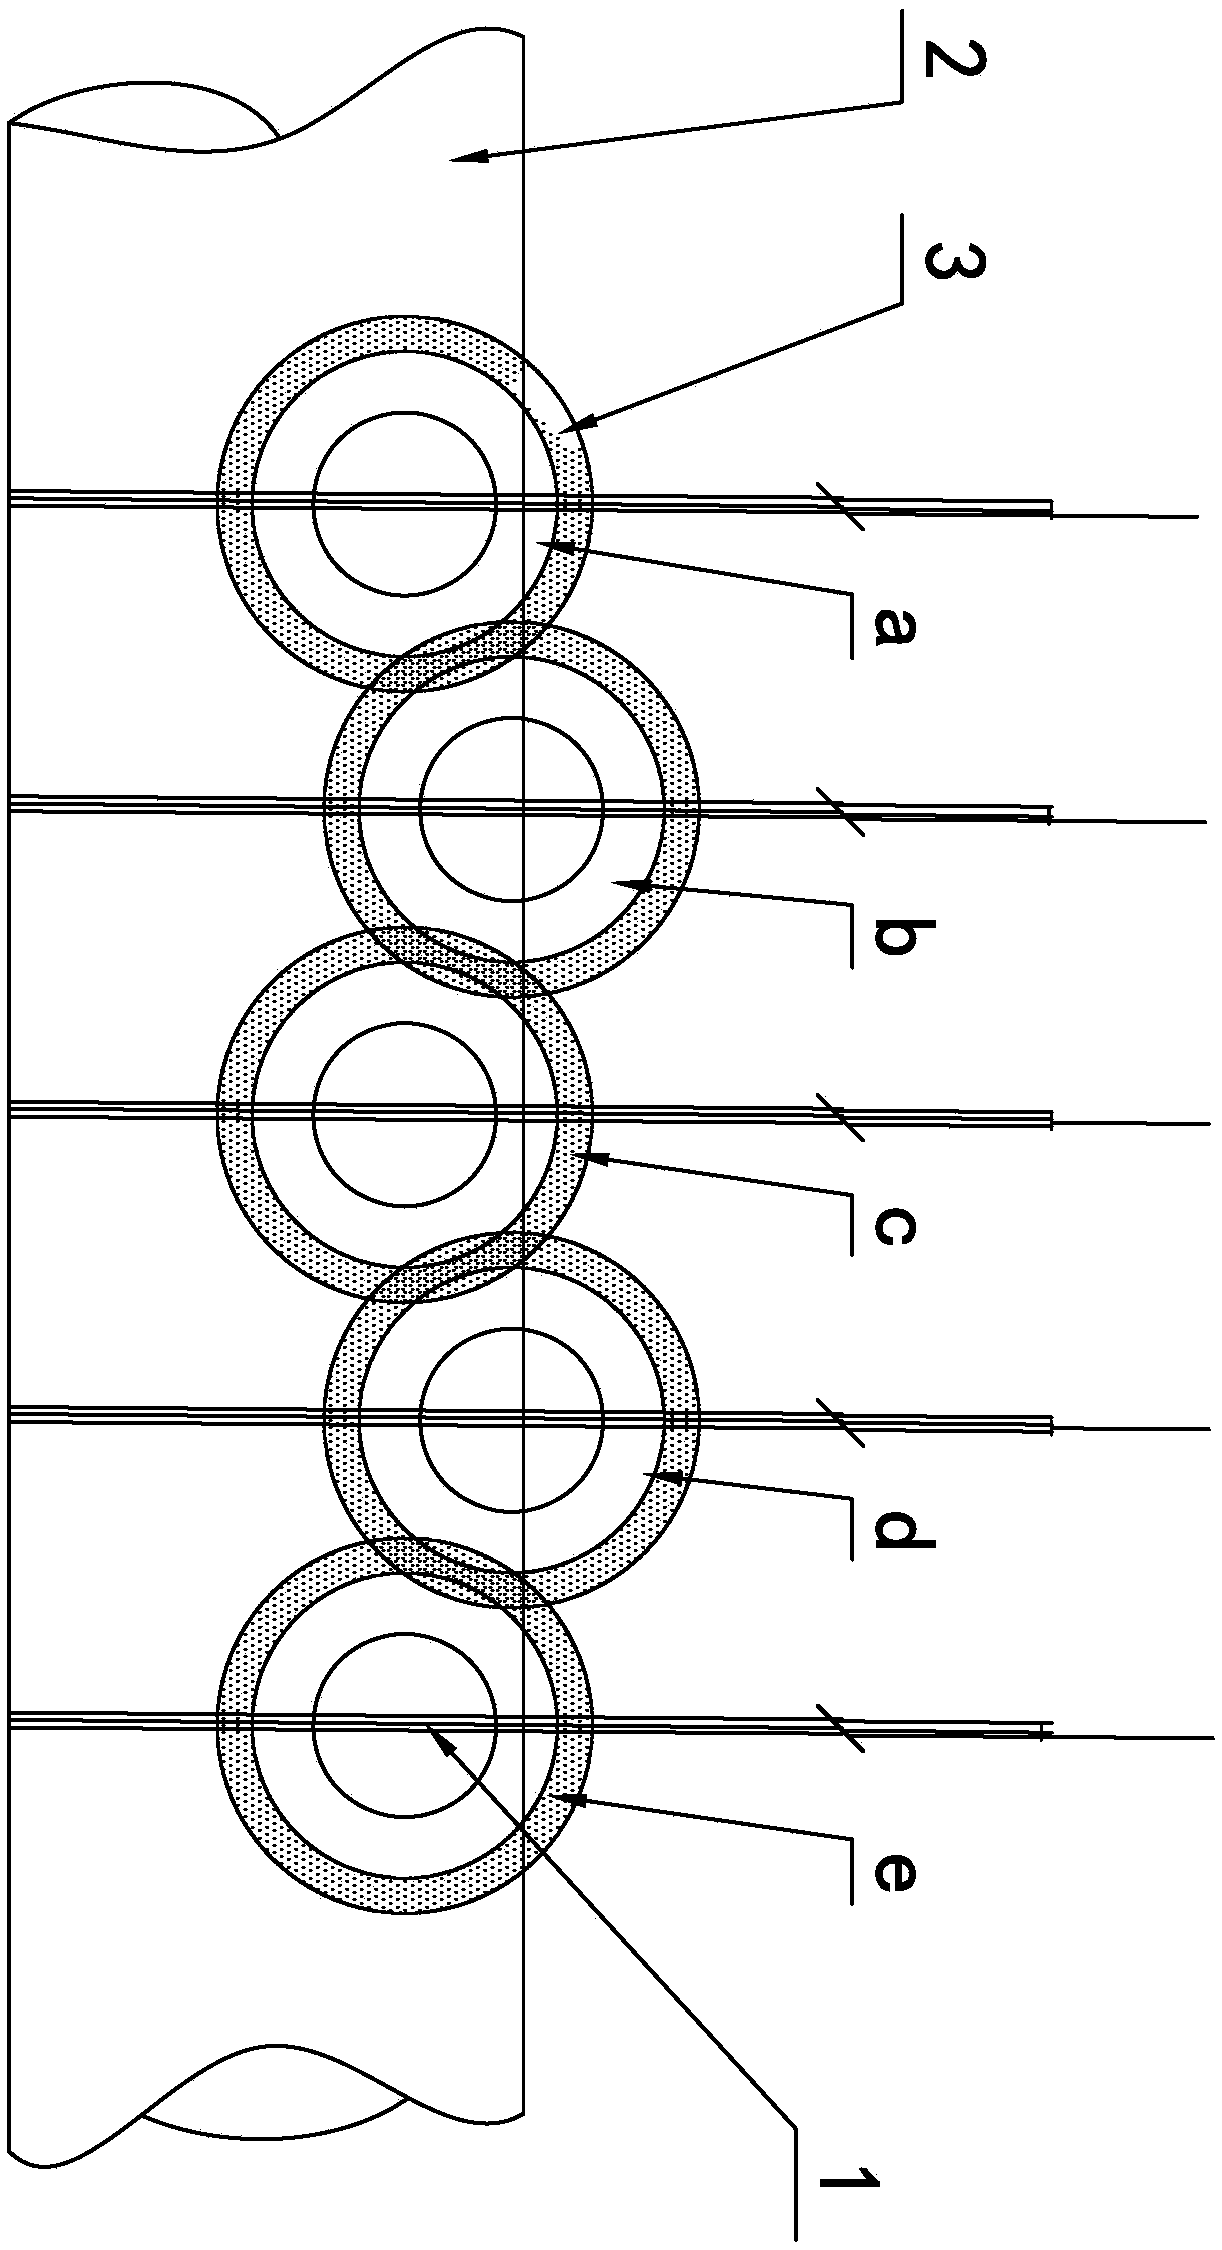 A kind of pretreatment method of anchor cable group passing through shield tunneling section